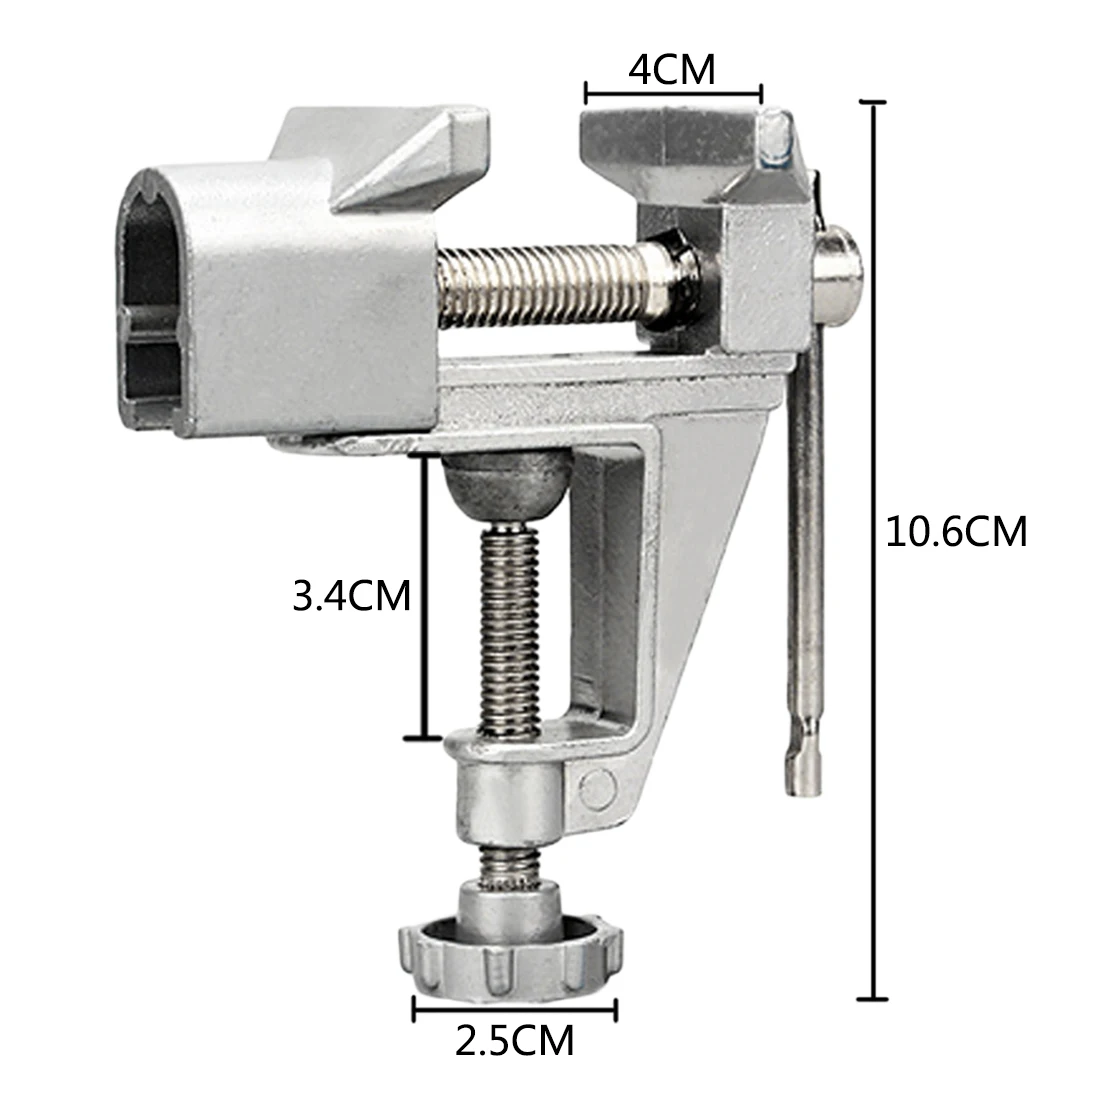 Enlarge New 30mm Aluminium Alloy Machine Bench Screw Vise Mini Table Vice Bench Clamp Screw Vise for DIY Craft Mould Fixed Repair Tool